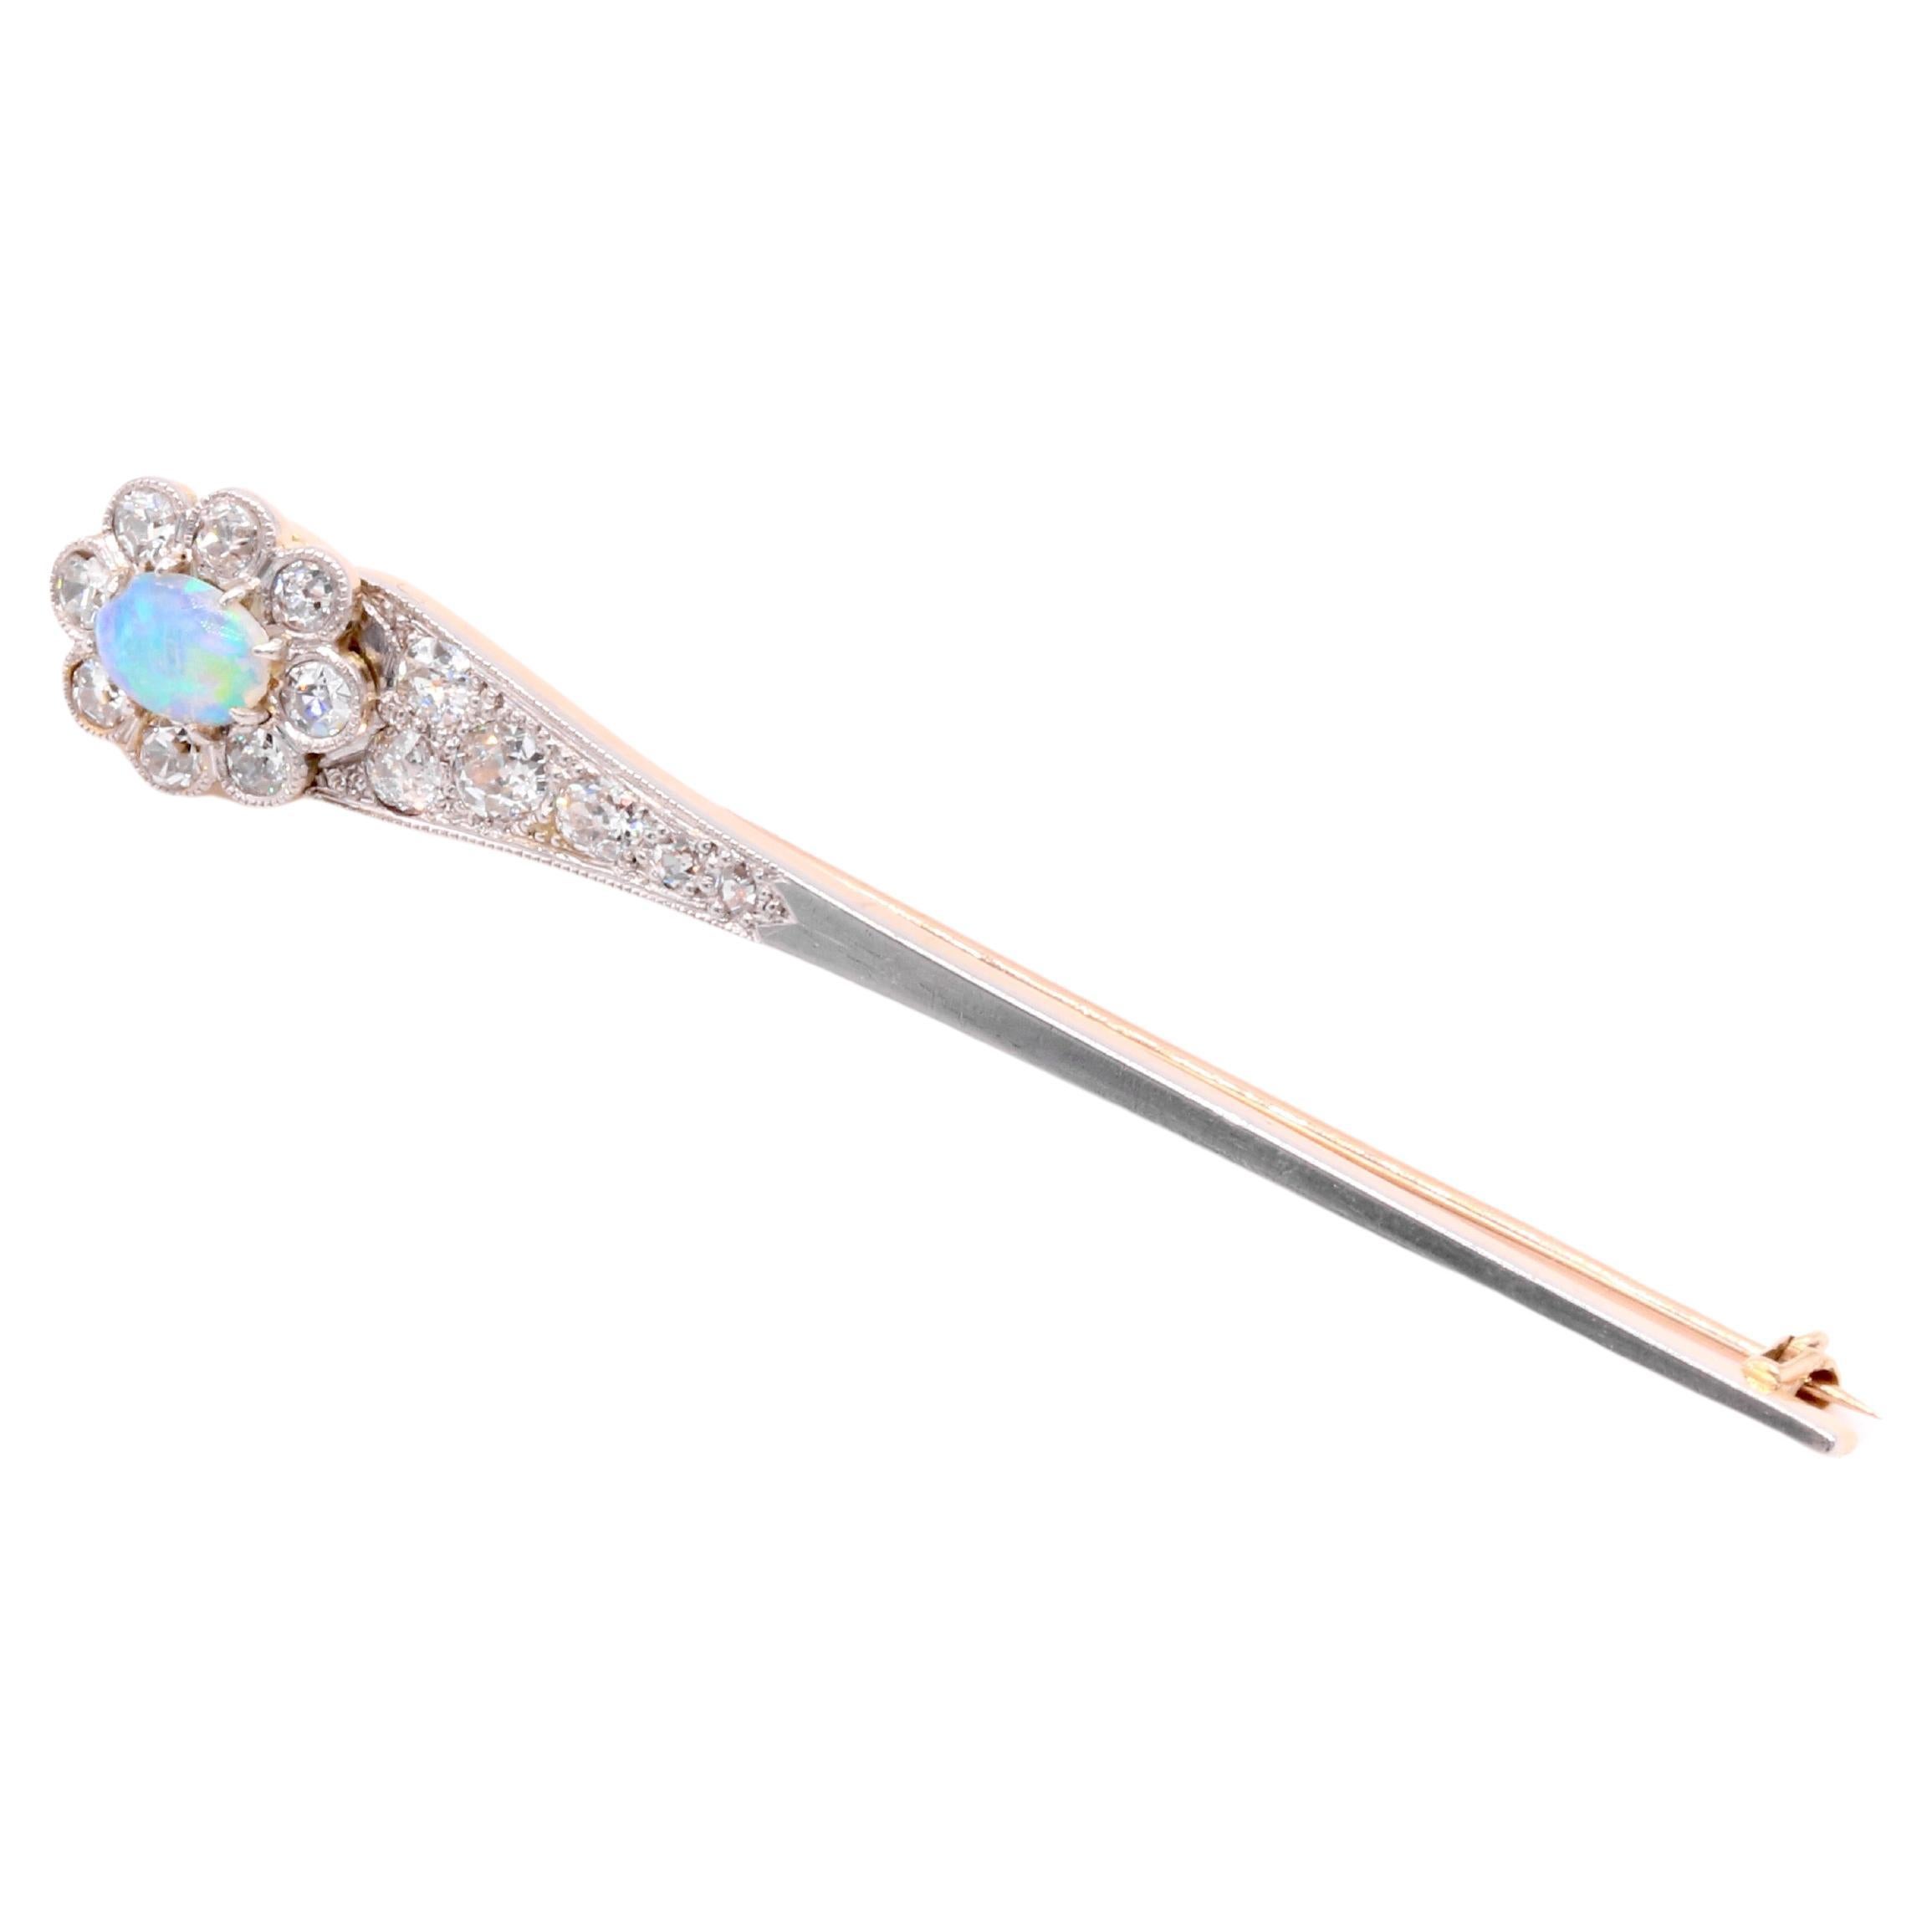 Edwardian Platinum & 18K Gold Opal and Old Cut Diamond Halley’s Comet Brooch